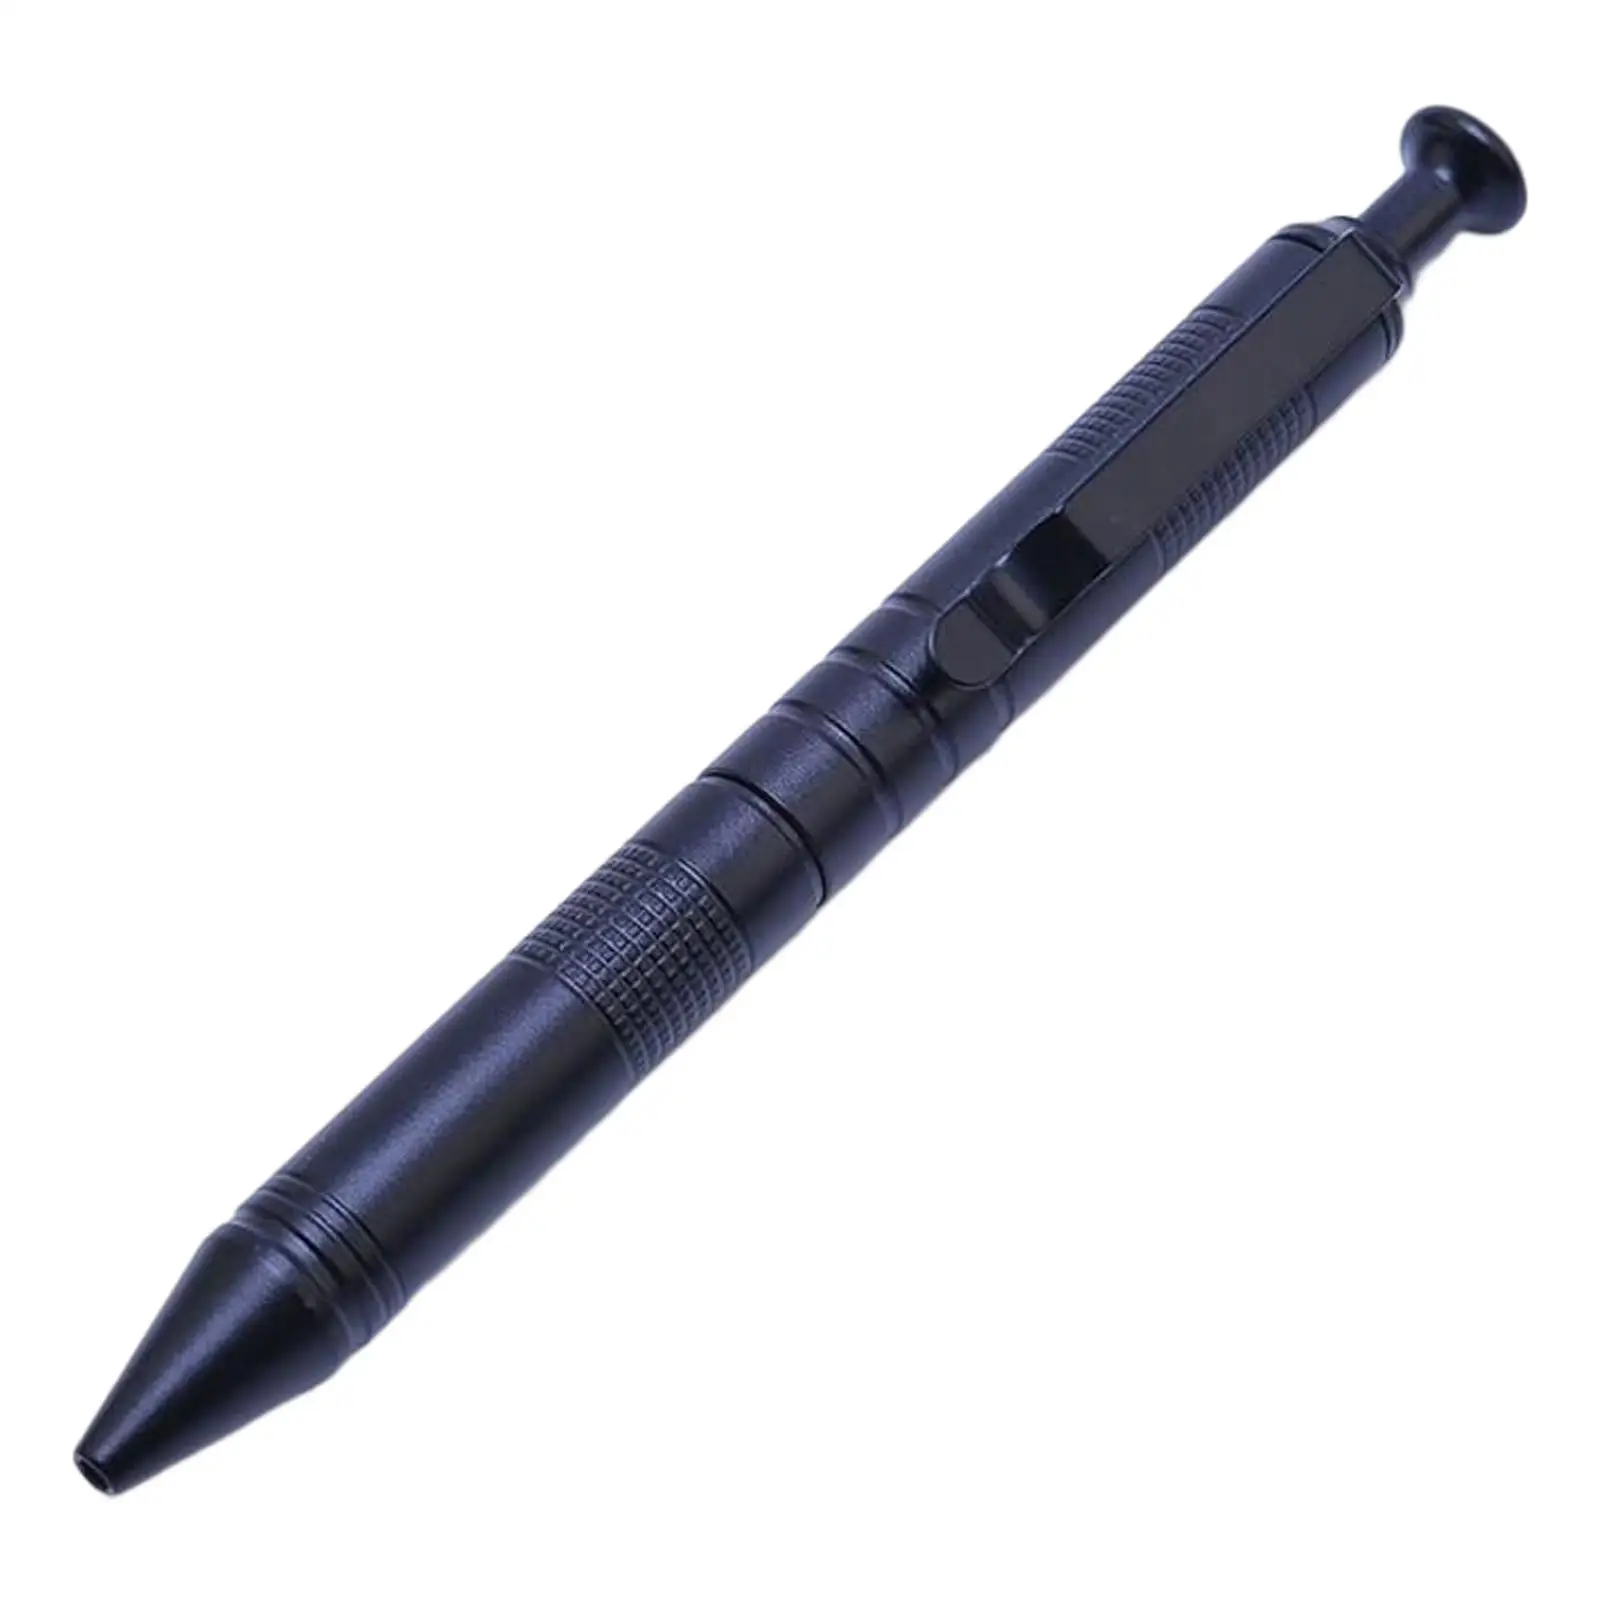 Signatures Personal Pen Defensa Durable Anti Skid Multifunctional Outdoor Sports Accessories